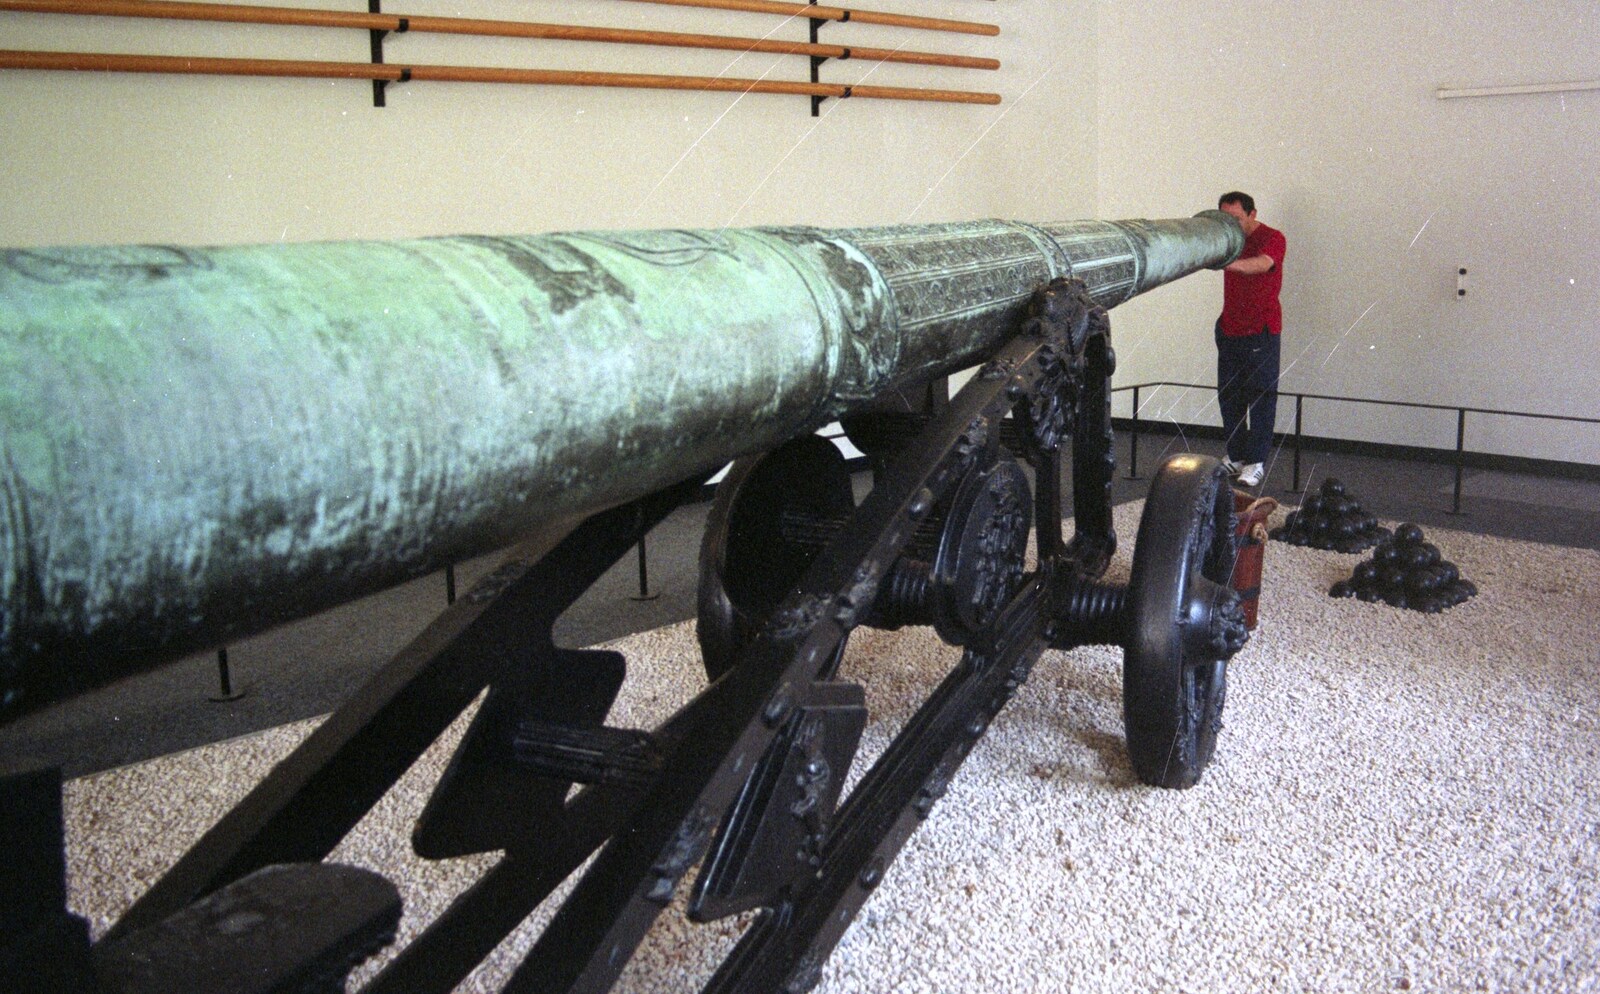 DH looks down the barrel of a very long canon from A BSCC Bike Ride to Gravelines, Pas de Calais, France - 11th May 2000